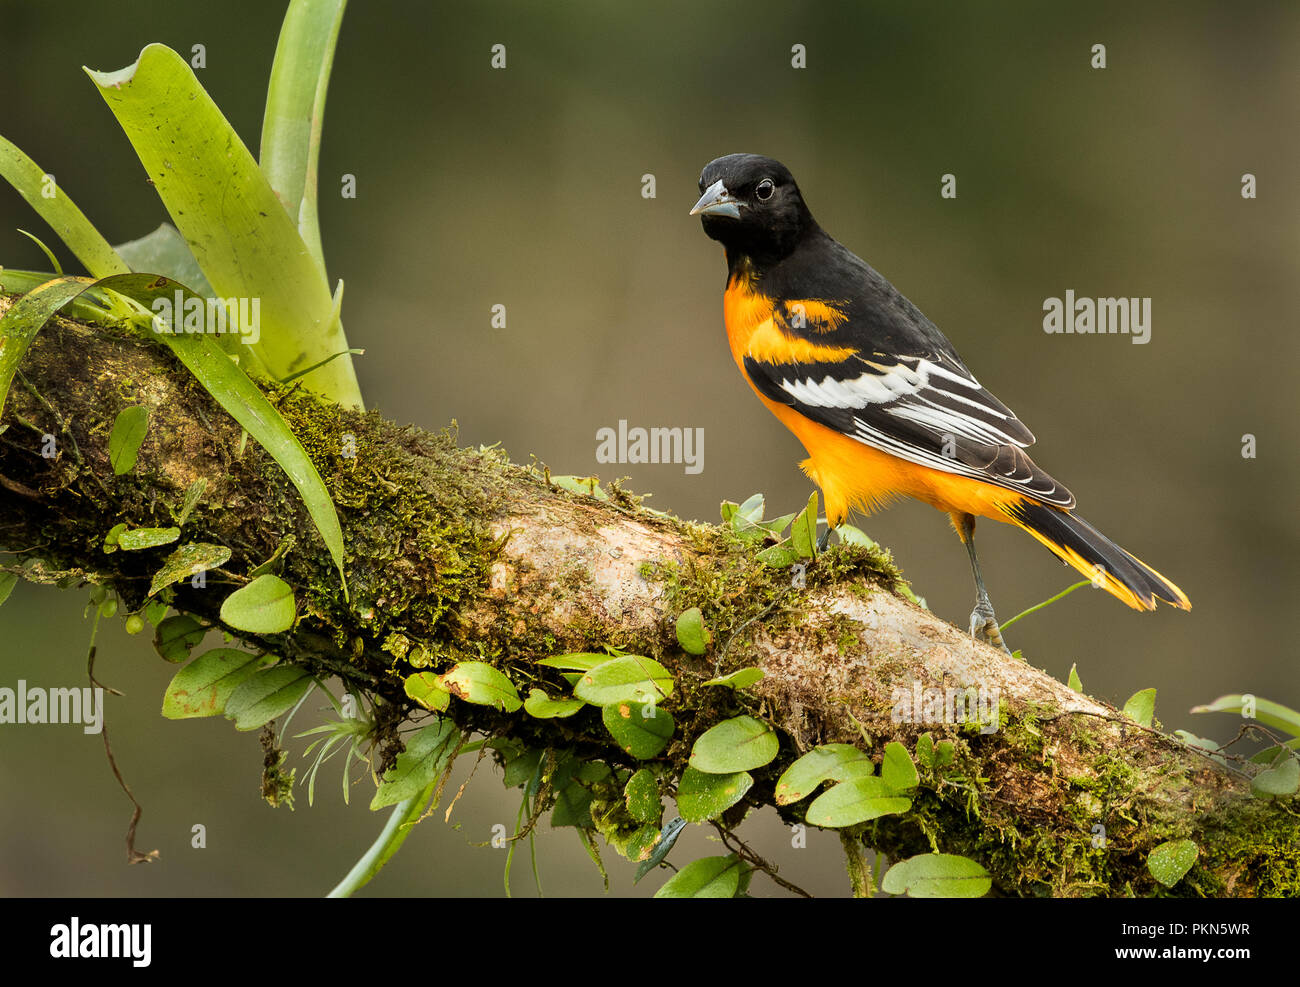 A perched male of Baltimore oriole photographed in Costa Rica Stock Photo